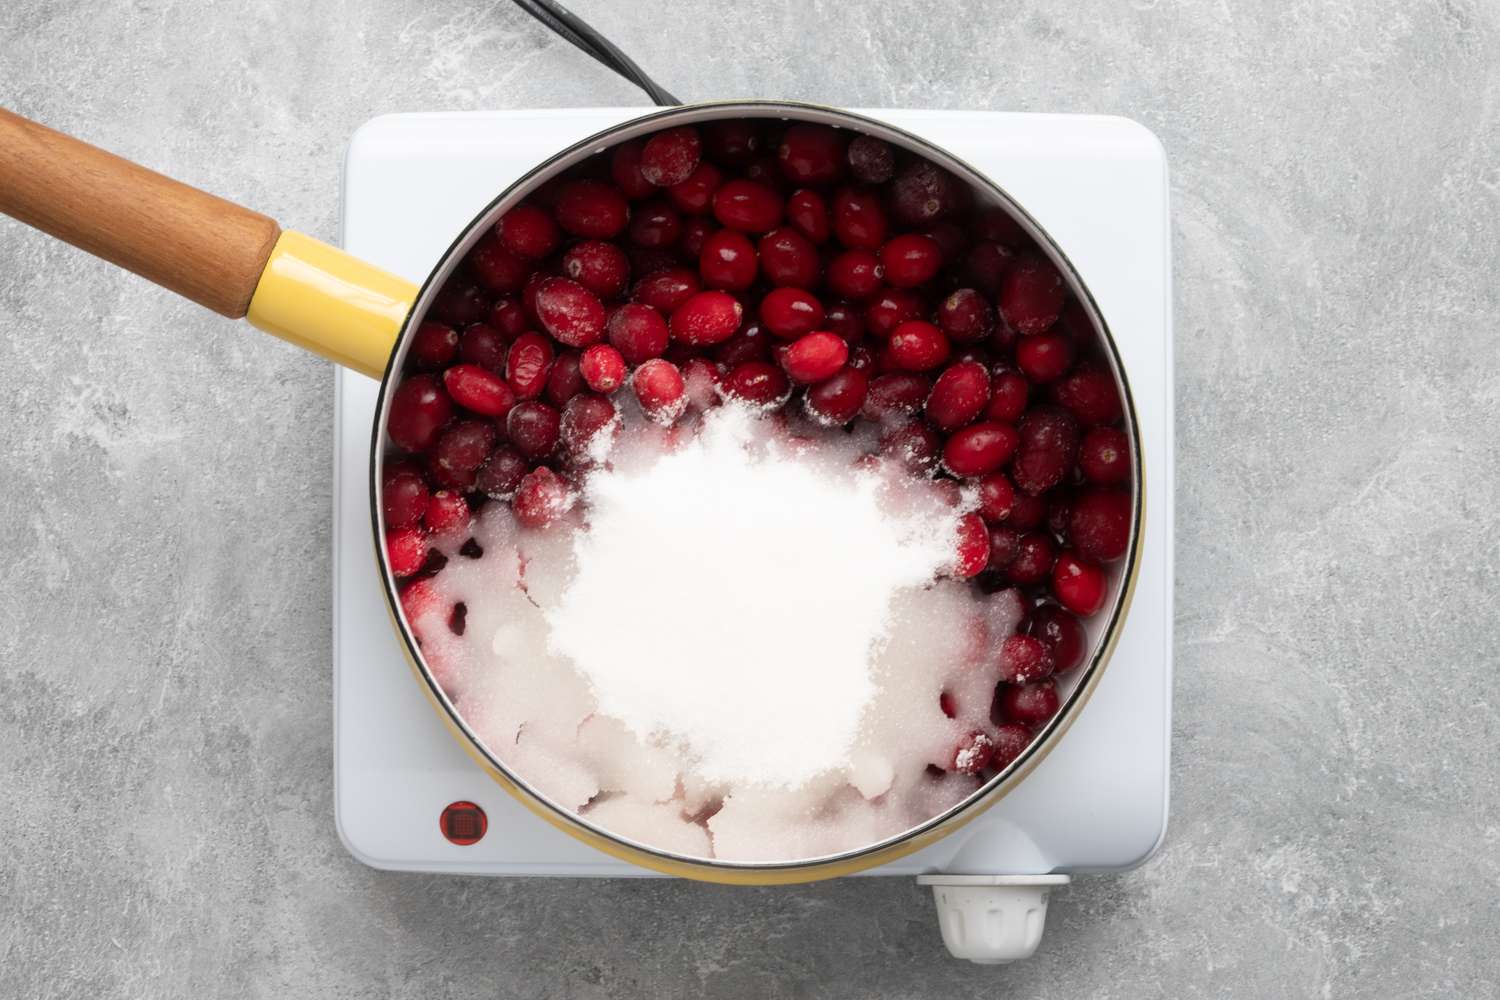 cranberries, sugar, and water are combined in a saucepan